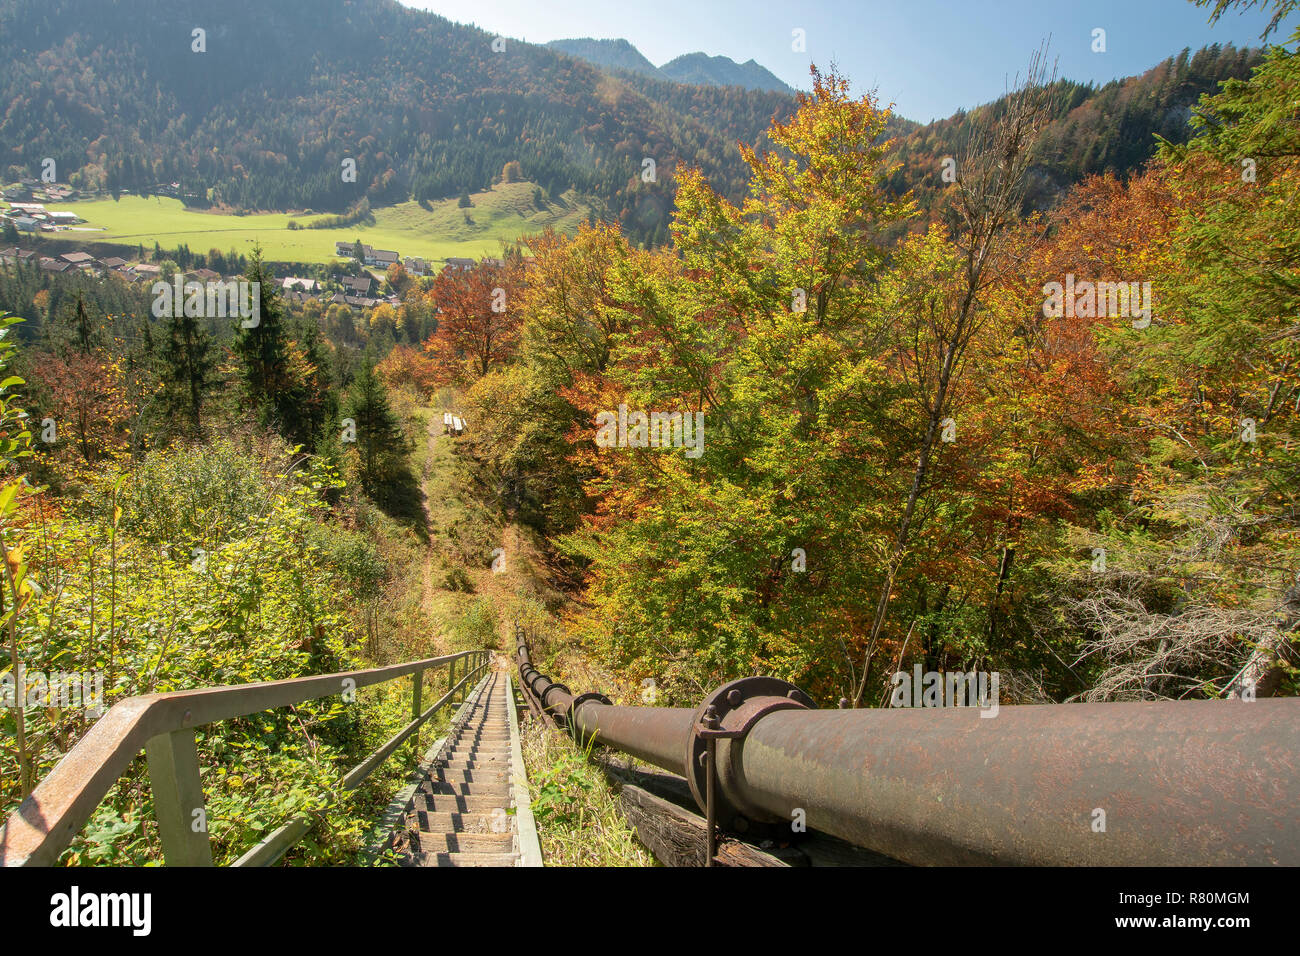 Historical brine pipeline running from Bad Reichenhall to Traunstien to Rosenheim. Now a hiking trail. Upper Bavaria, Germany Stock Photo